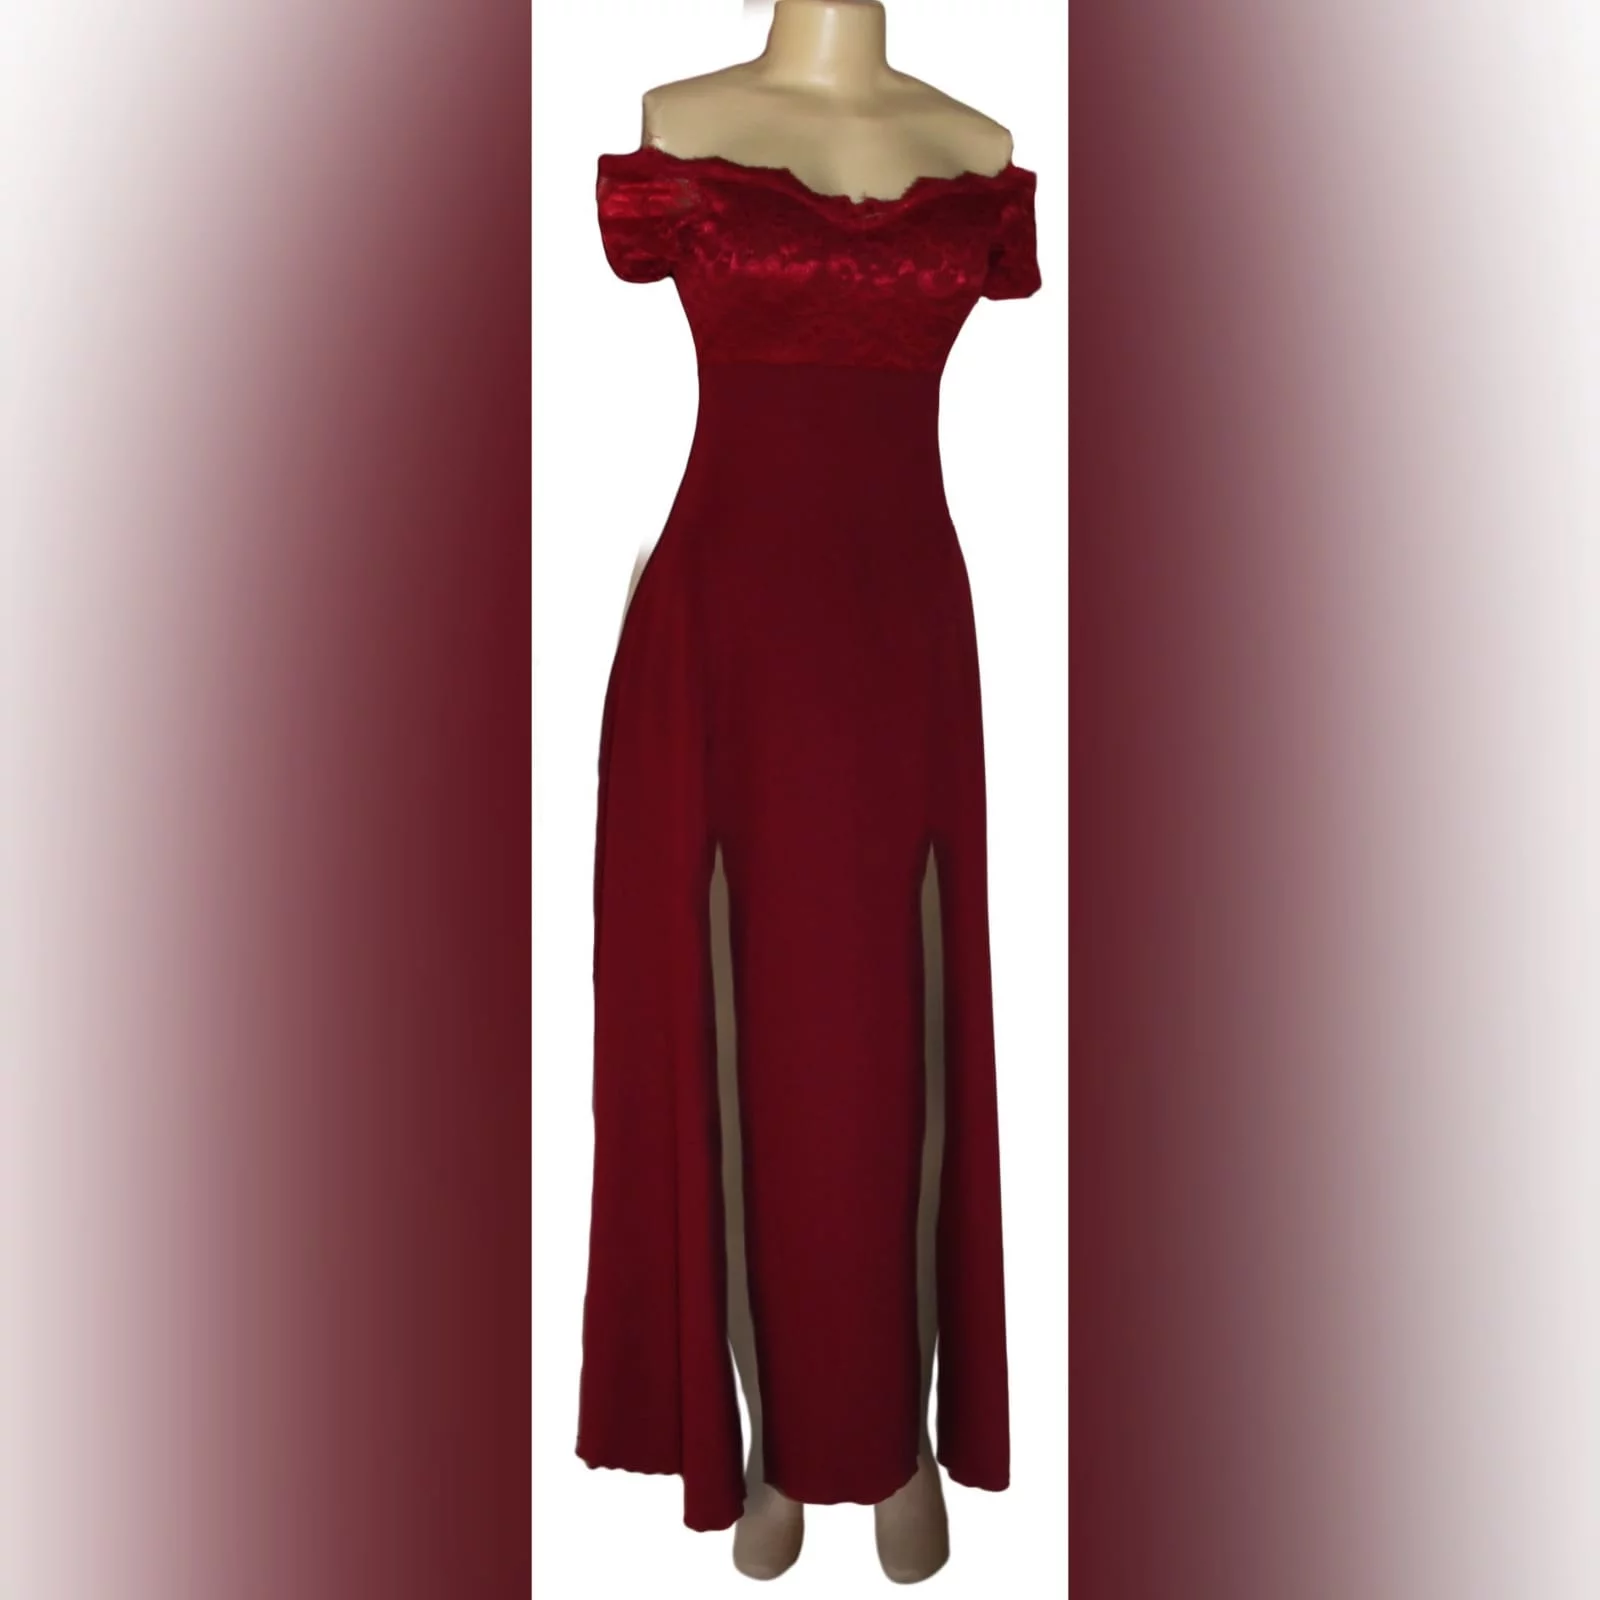 Maroon double slit matric dance dress 3 maroon double slit matric dance dress with an off shoulder lace bodice and a detachable belt.